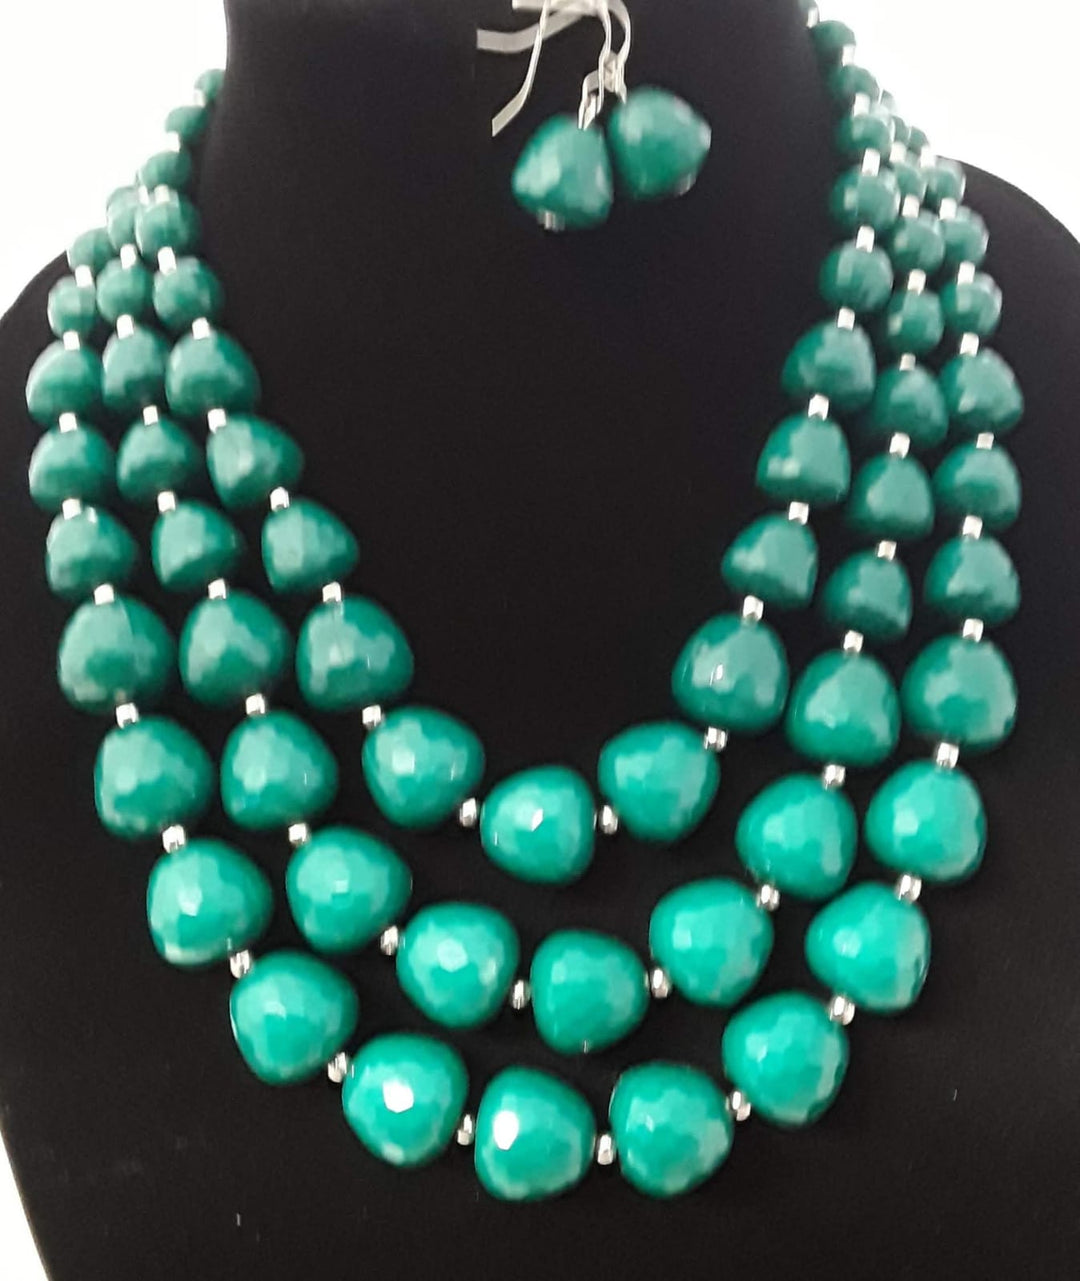 Exciting Green 2 pc Round Beaded Necklace Set